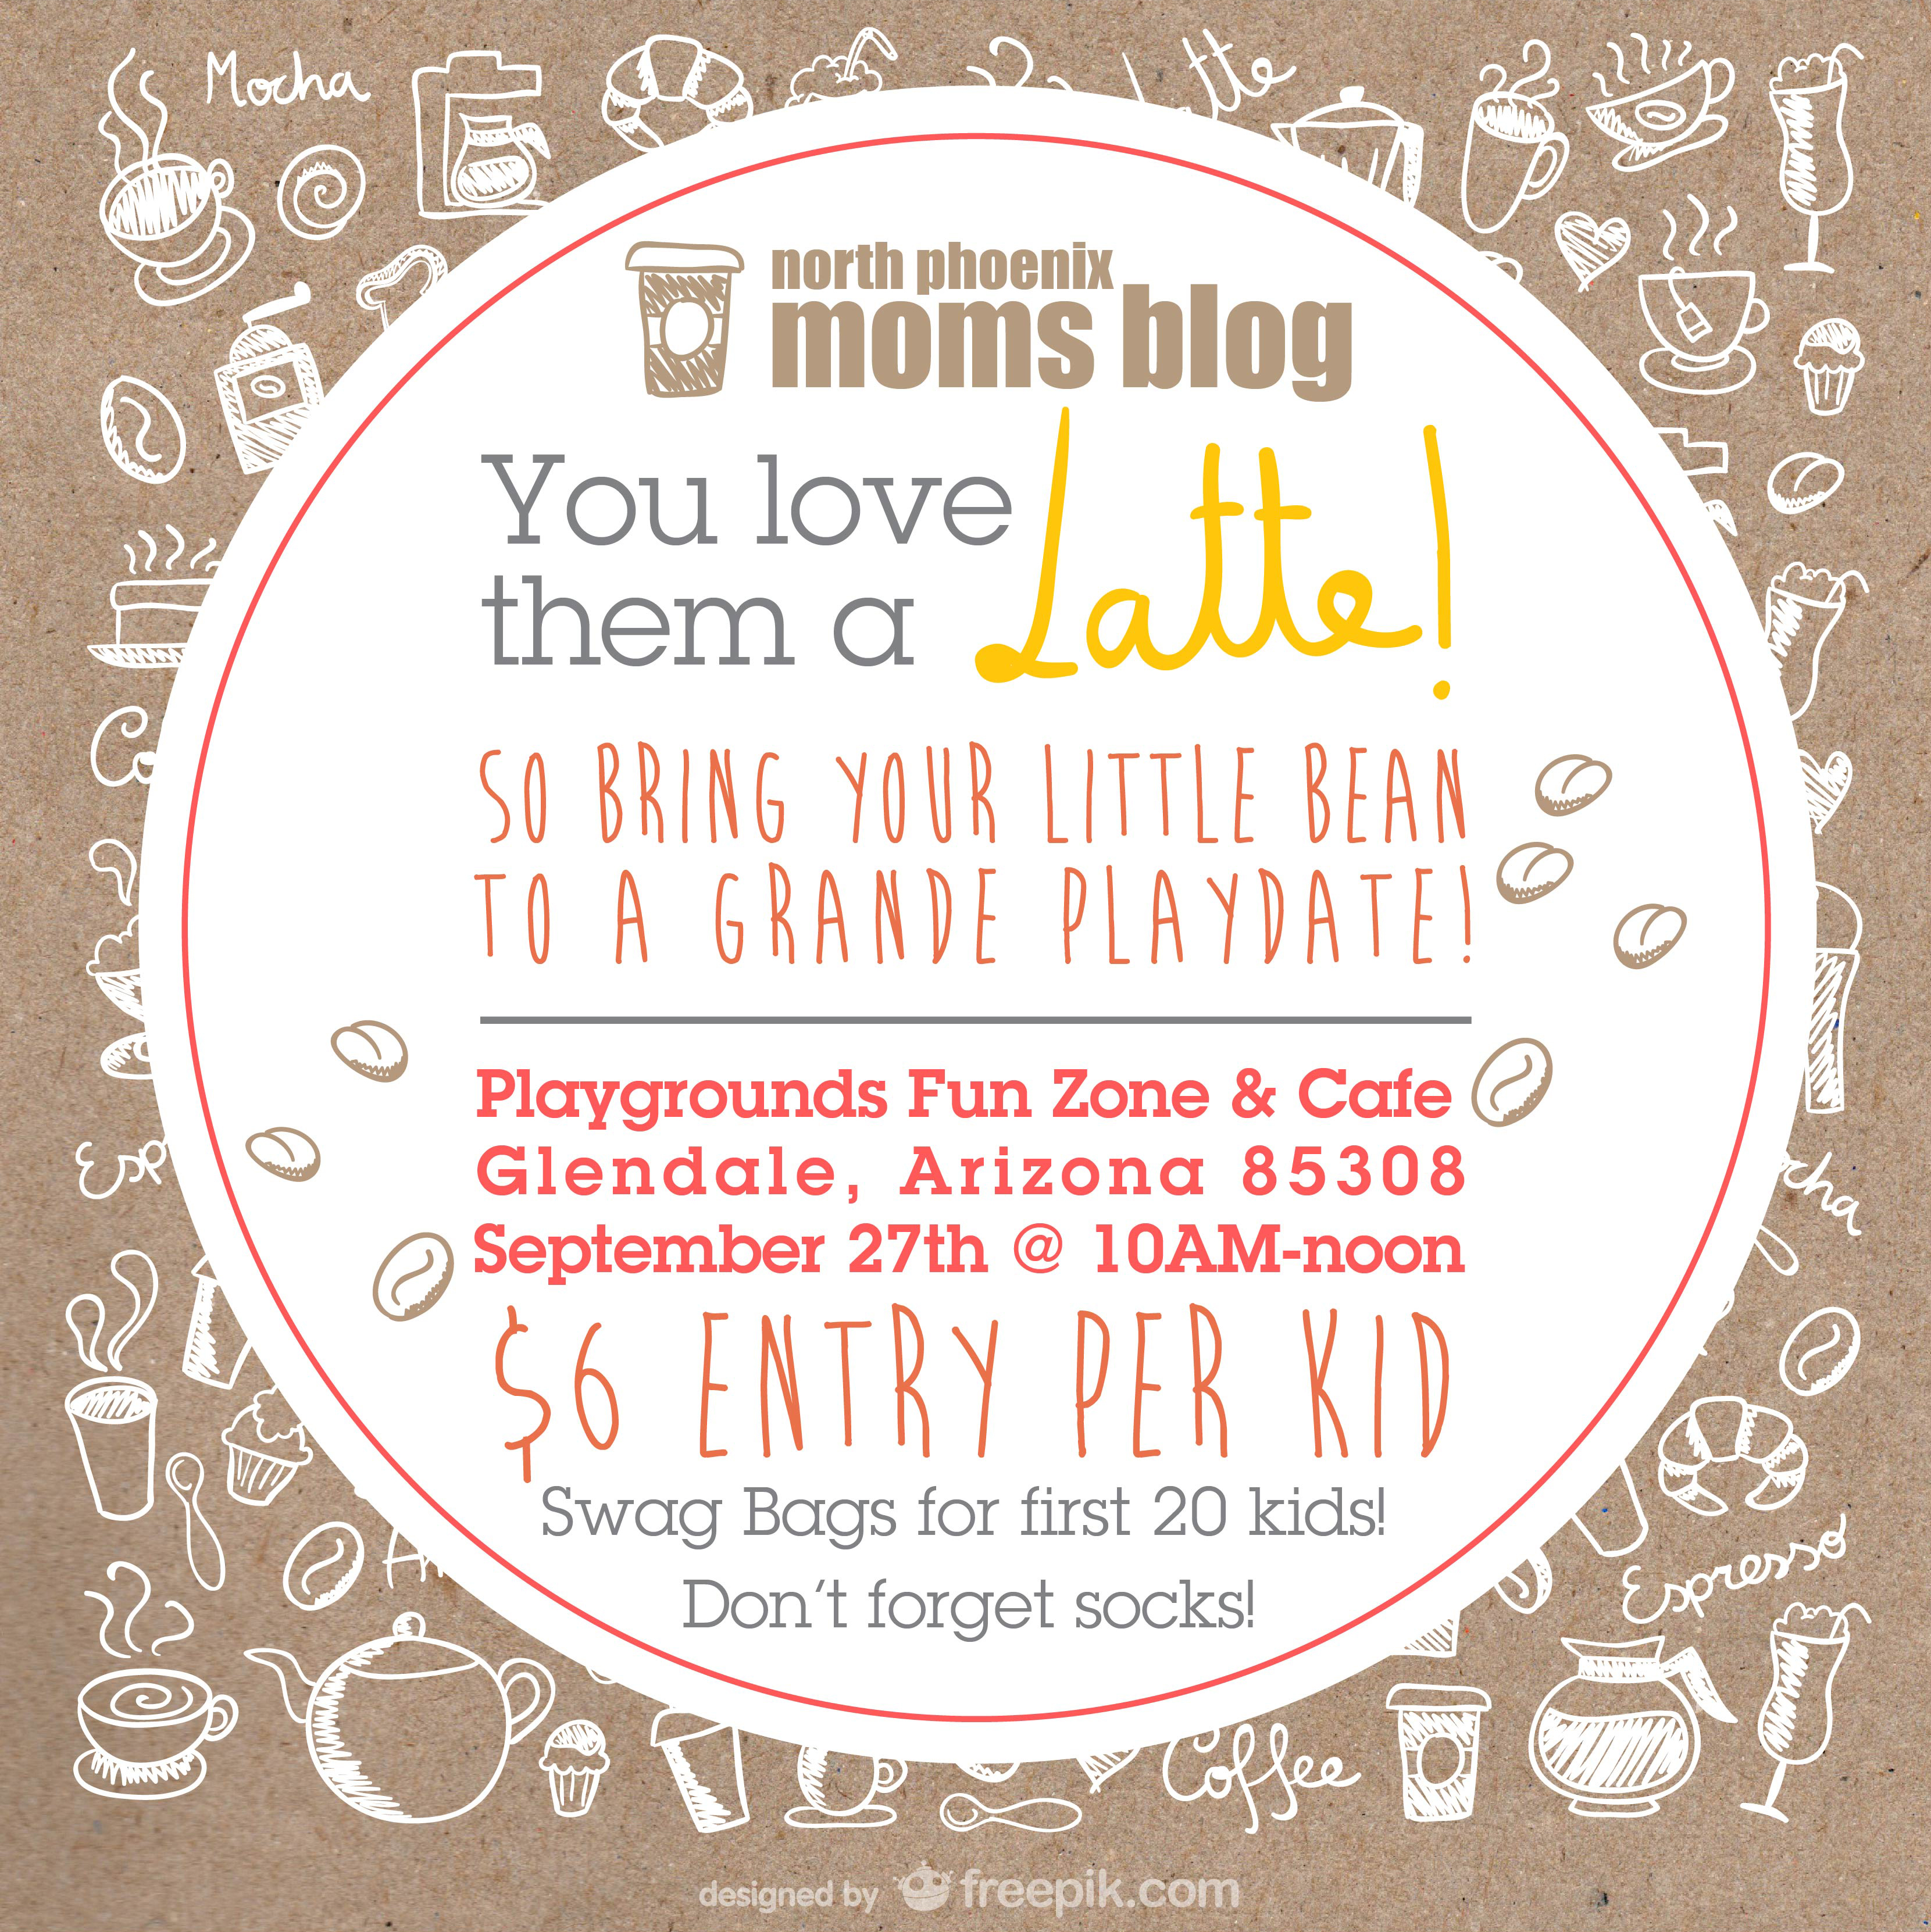 North Valley Moms Blog - Playgrounds Playdate